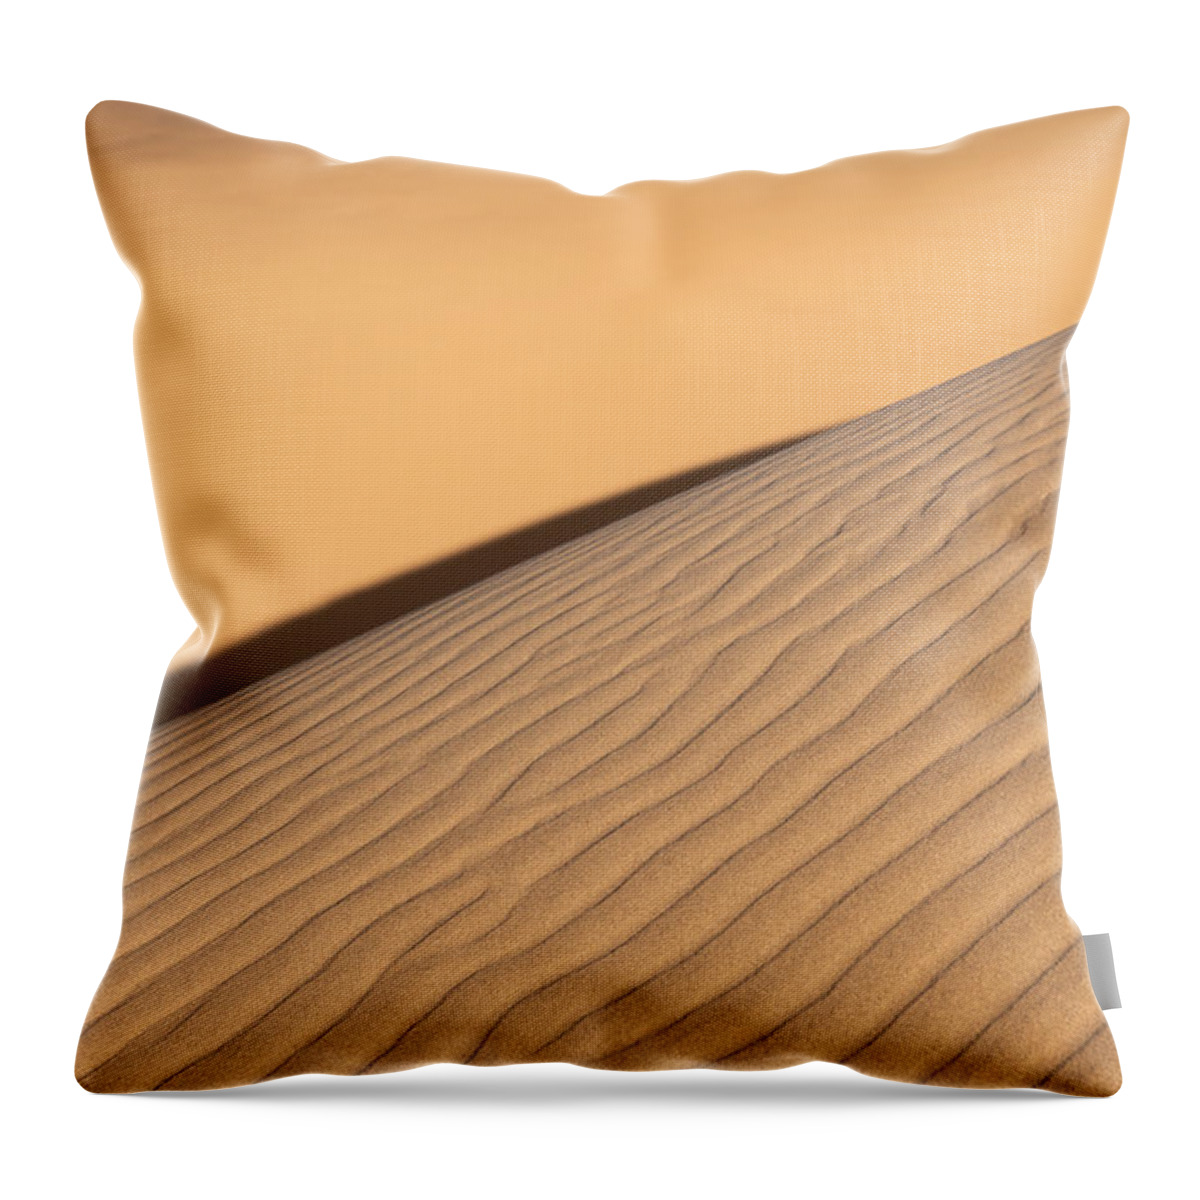 Sand Dune Throw Pillow featuring the photograph Diagonal Sand Dune by Peter Boehringer